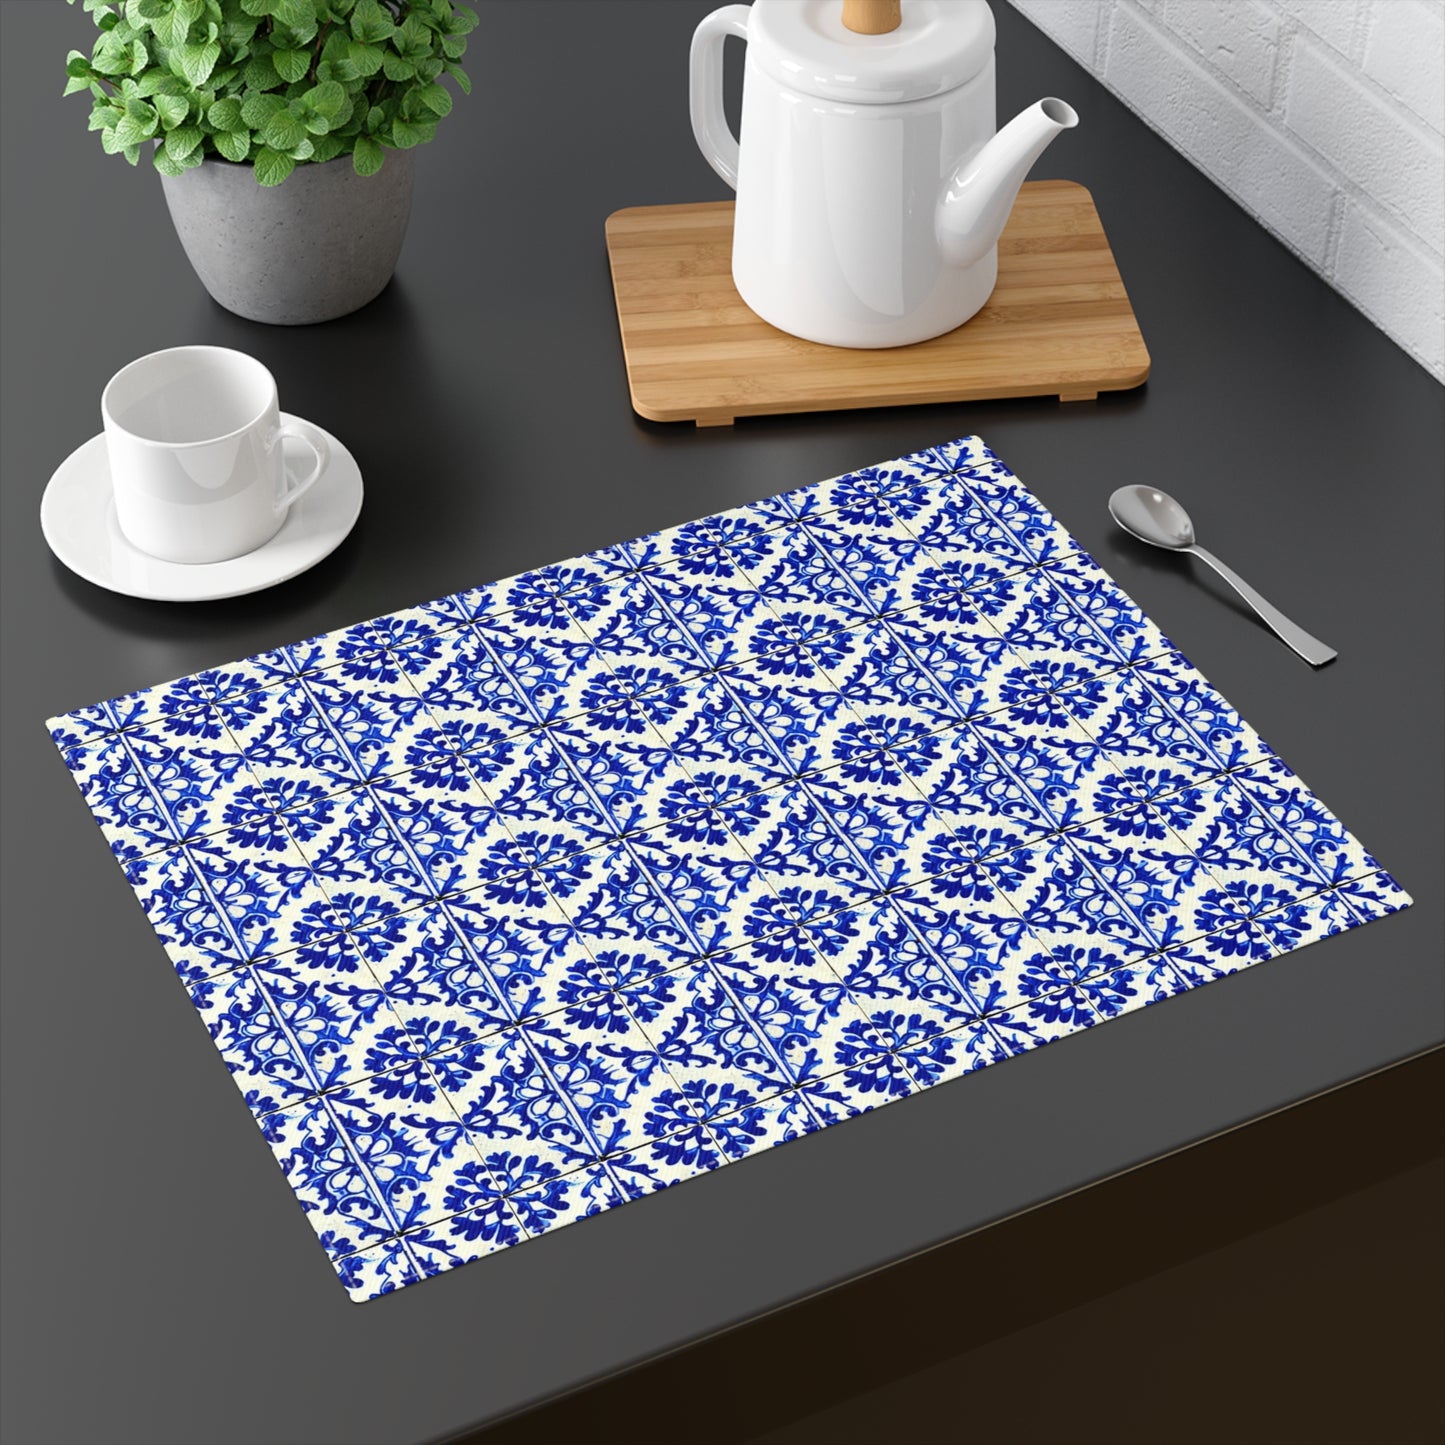 Portuguese Summer Blue and White Floral Antique Tile Entertaining Dinner Party Patio Indoor Outdoor Home Decor Placemat, 1pc